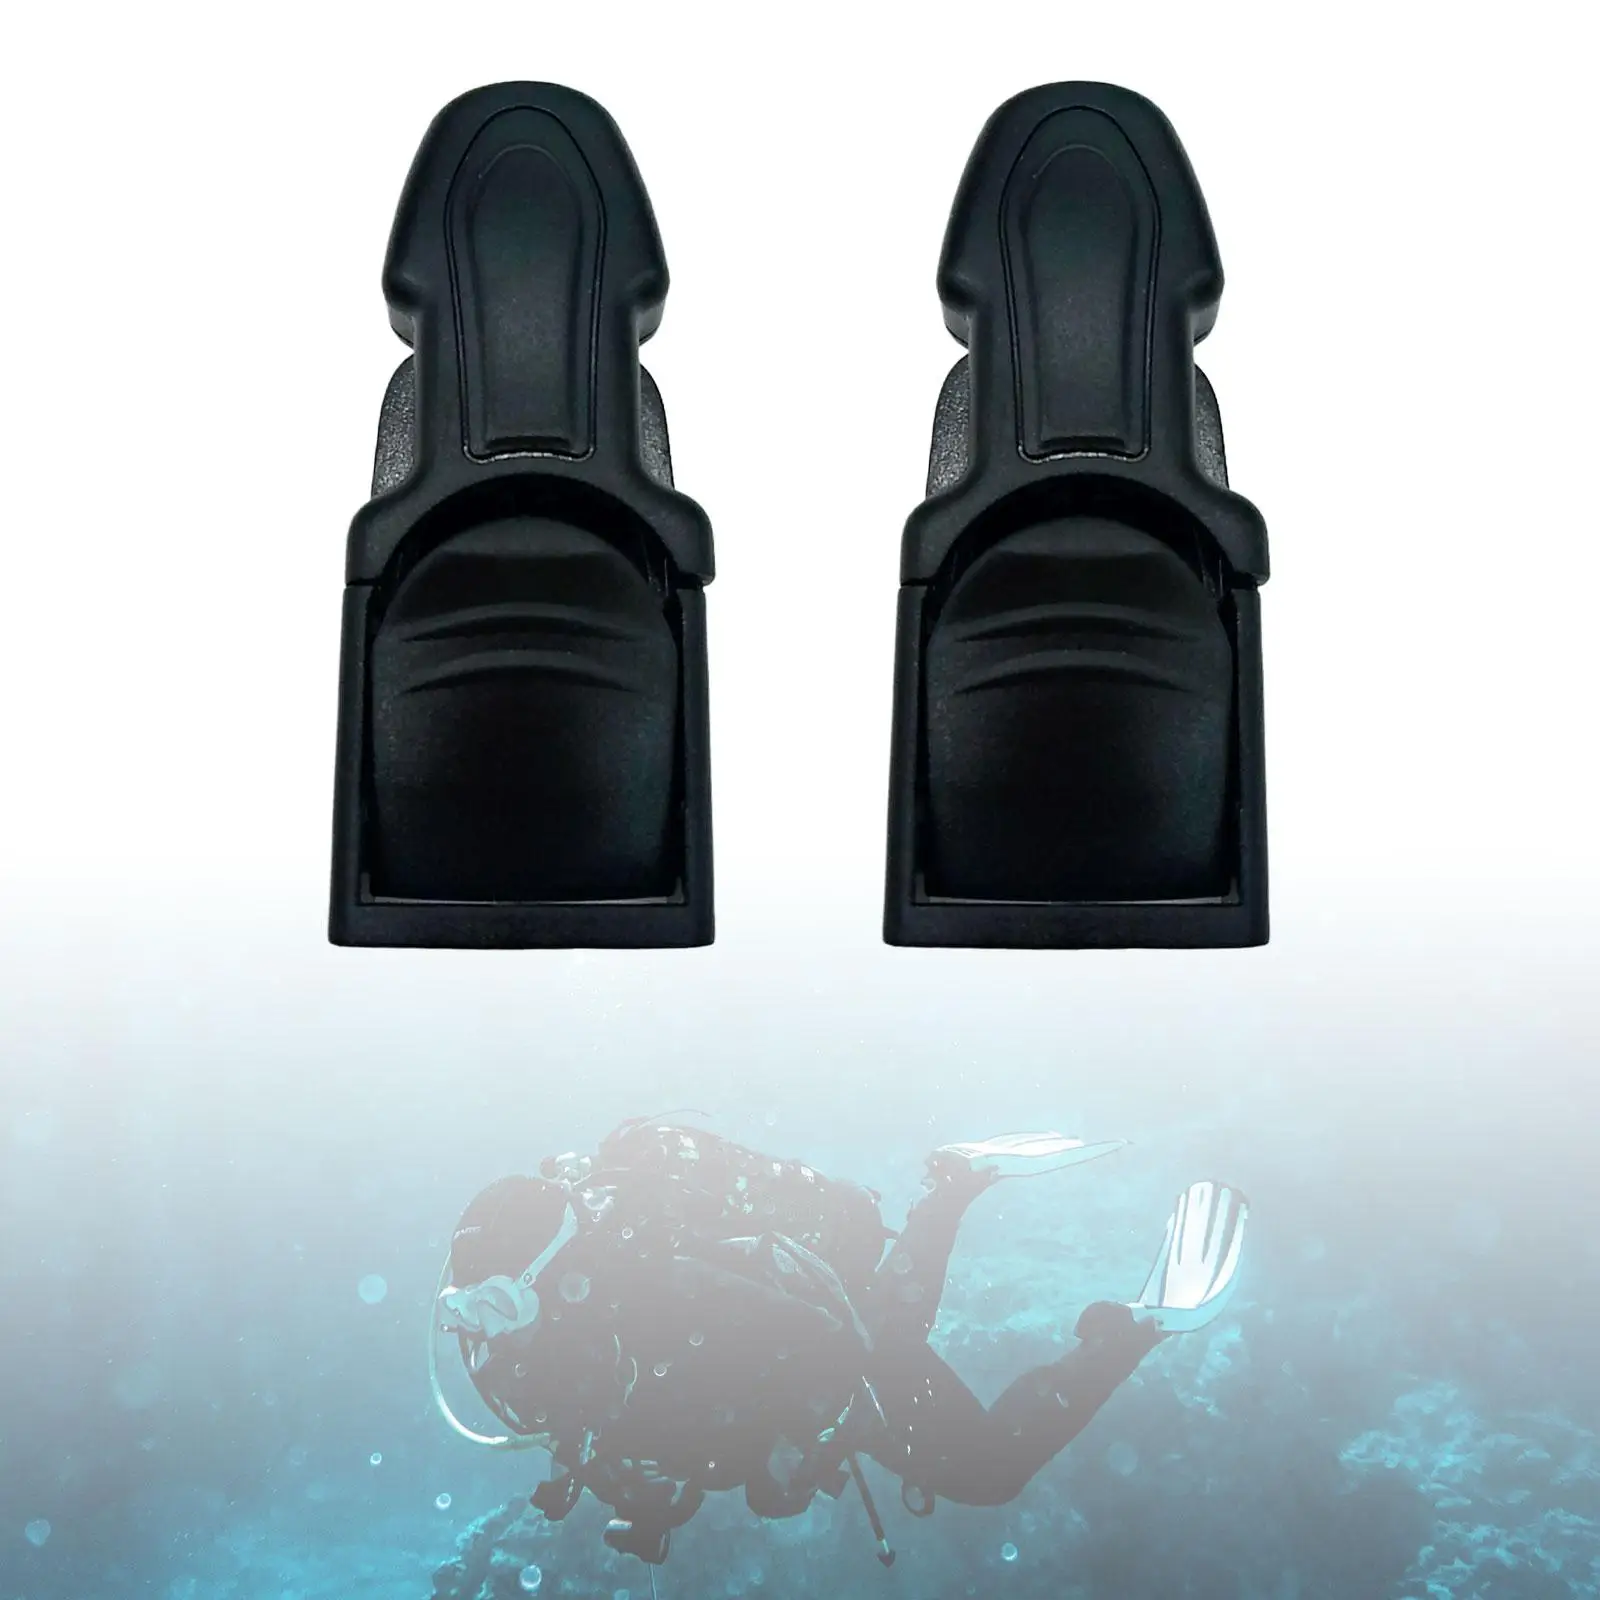 2 Pieces Diving Fin Strap Buckles Universal Swimming Fin Flippers Buckles Replace Part for Freediving Scuba Diving Snorkeling